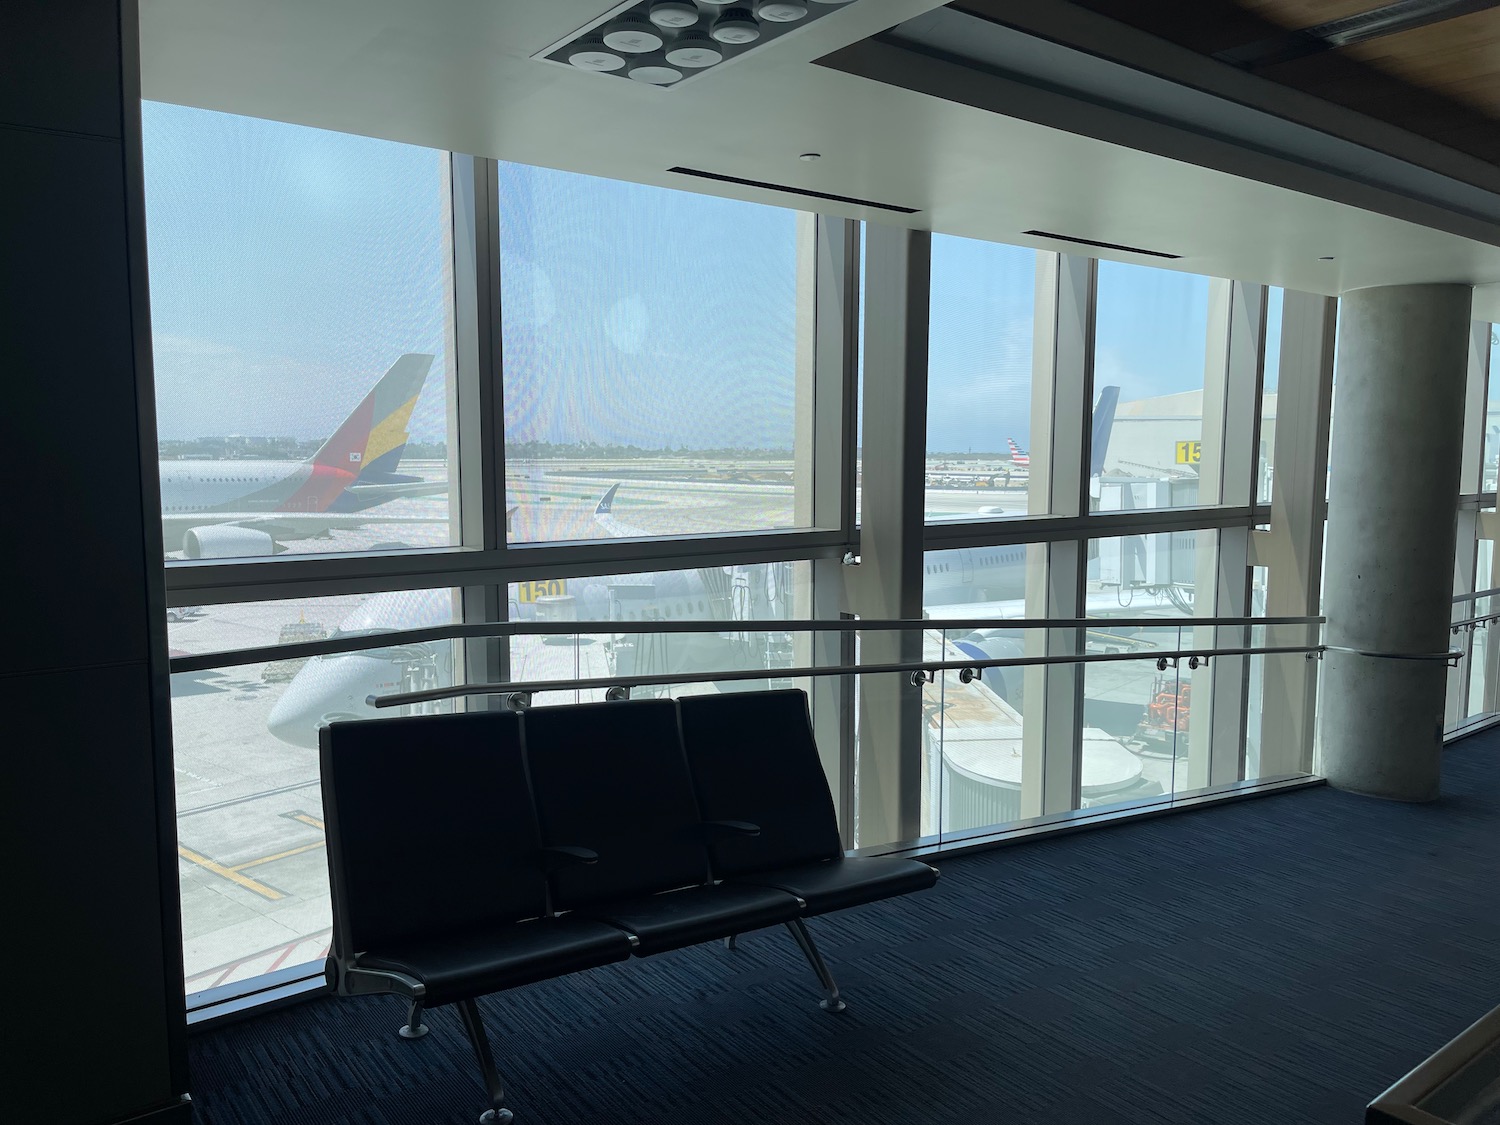 a seat in a room with windows and planes in the background